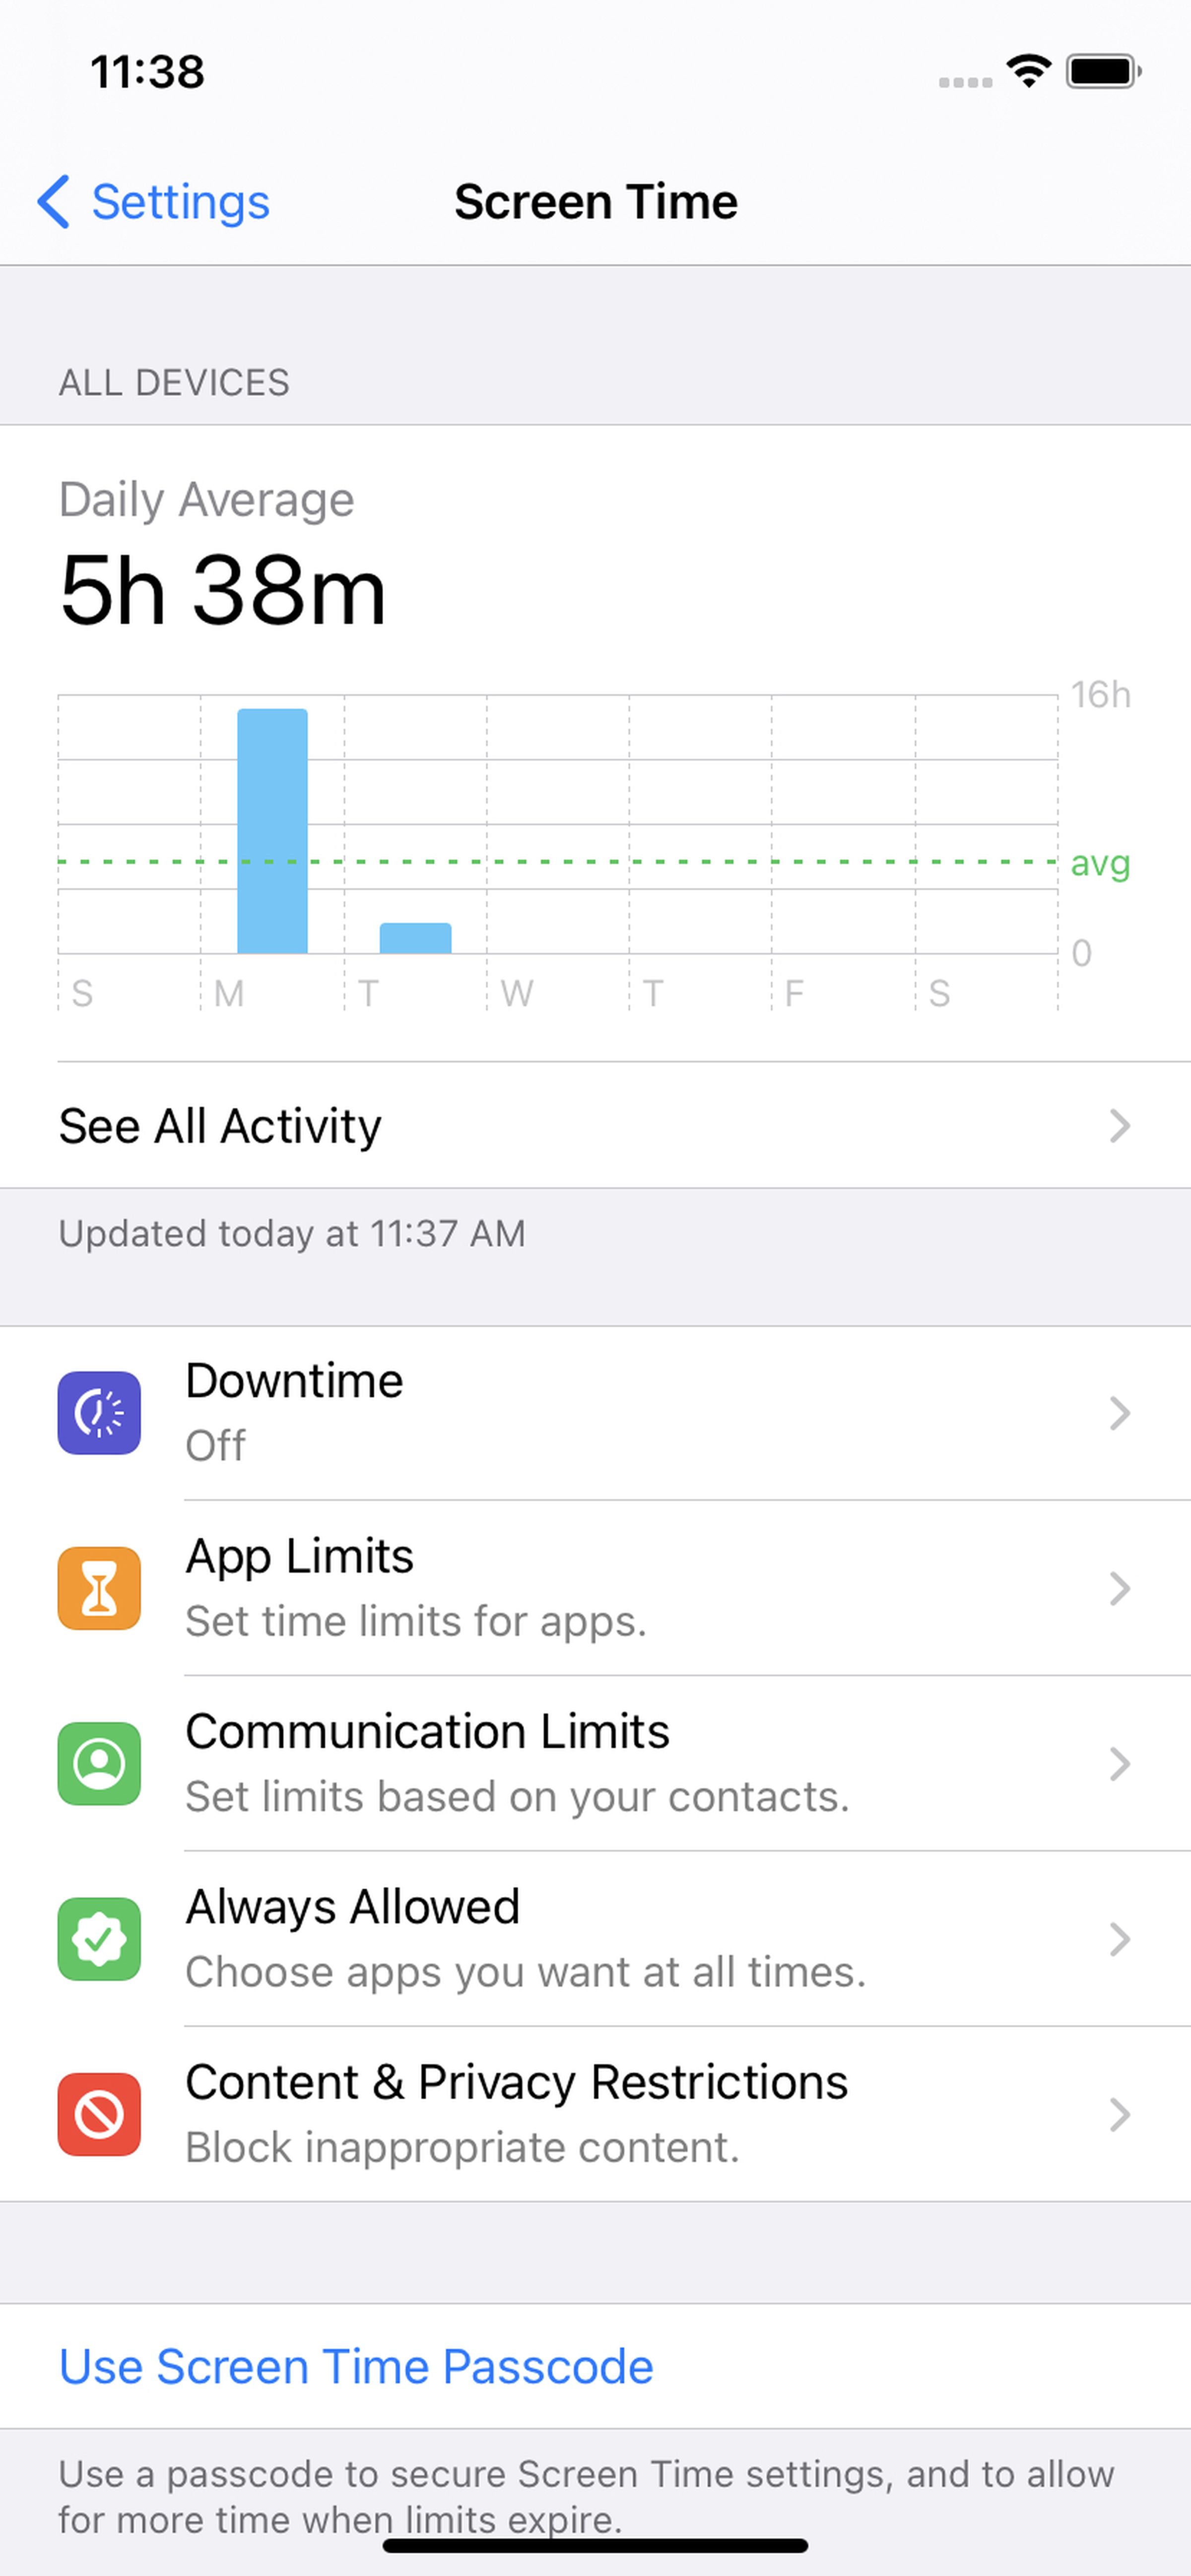 Your Screen Time screen is accessible from your Settings menu.